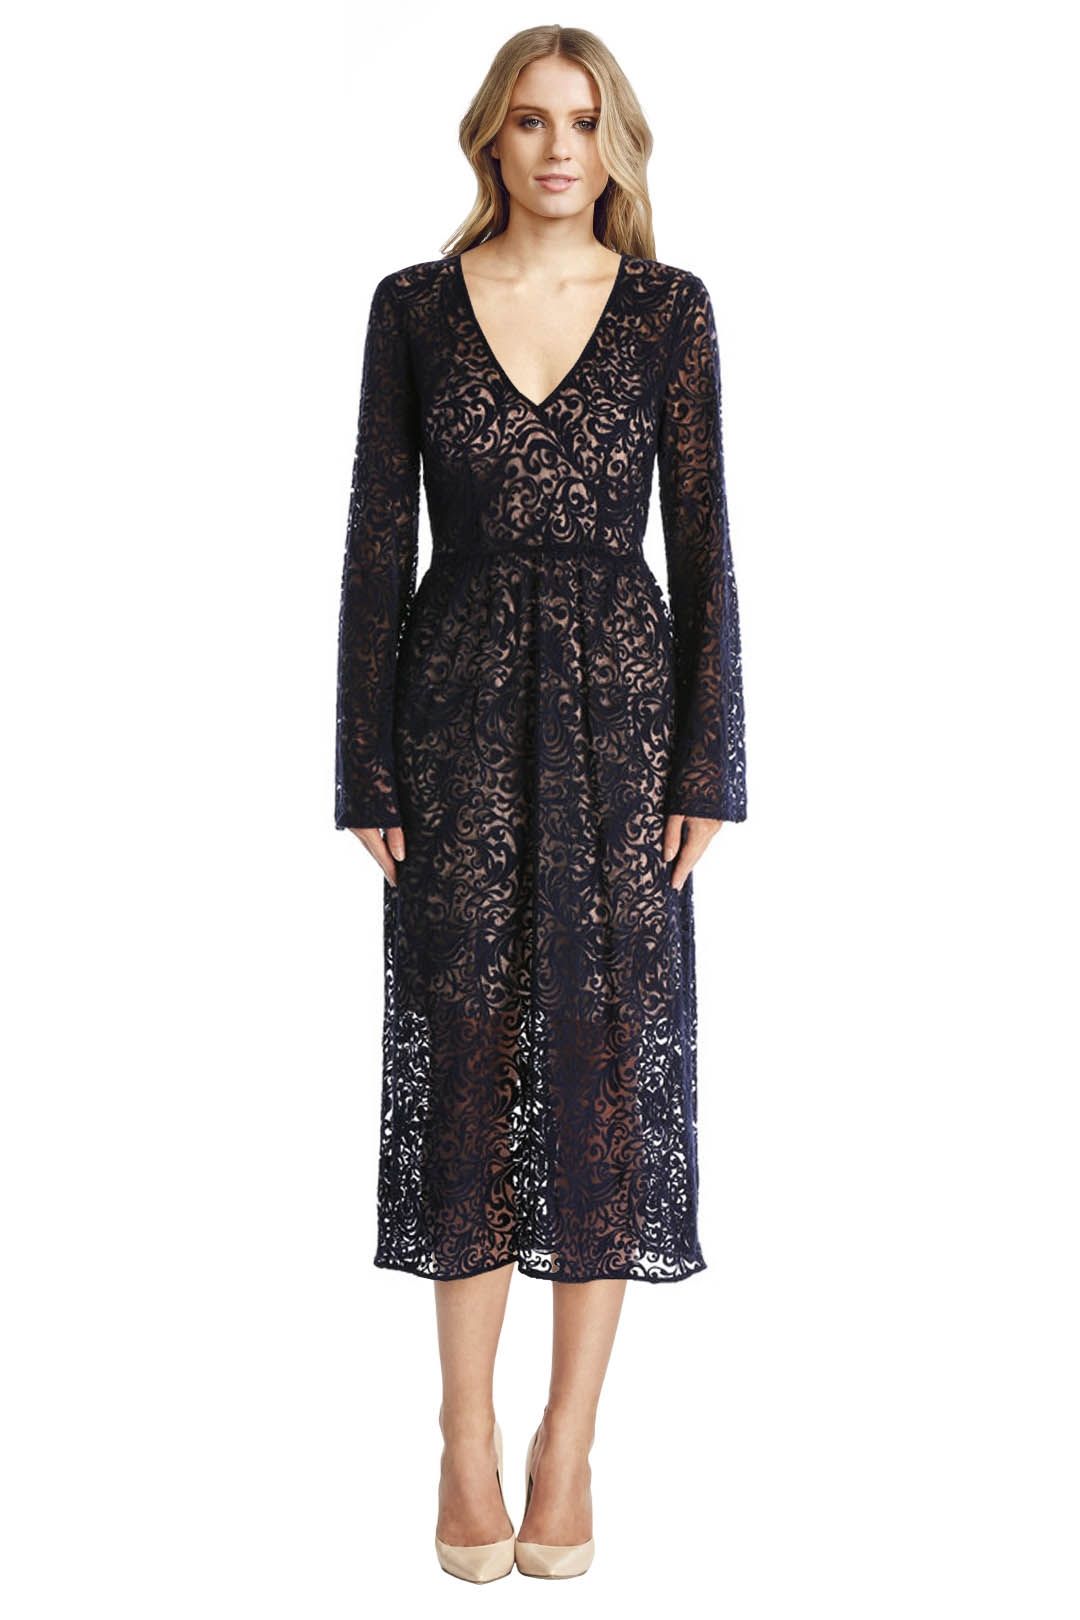 Yeojin Bae - Embroidered Lace Marianne Dress - Black Lace - Front